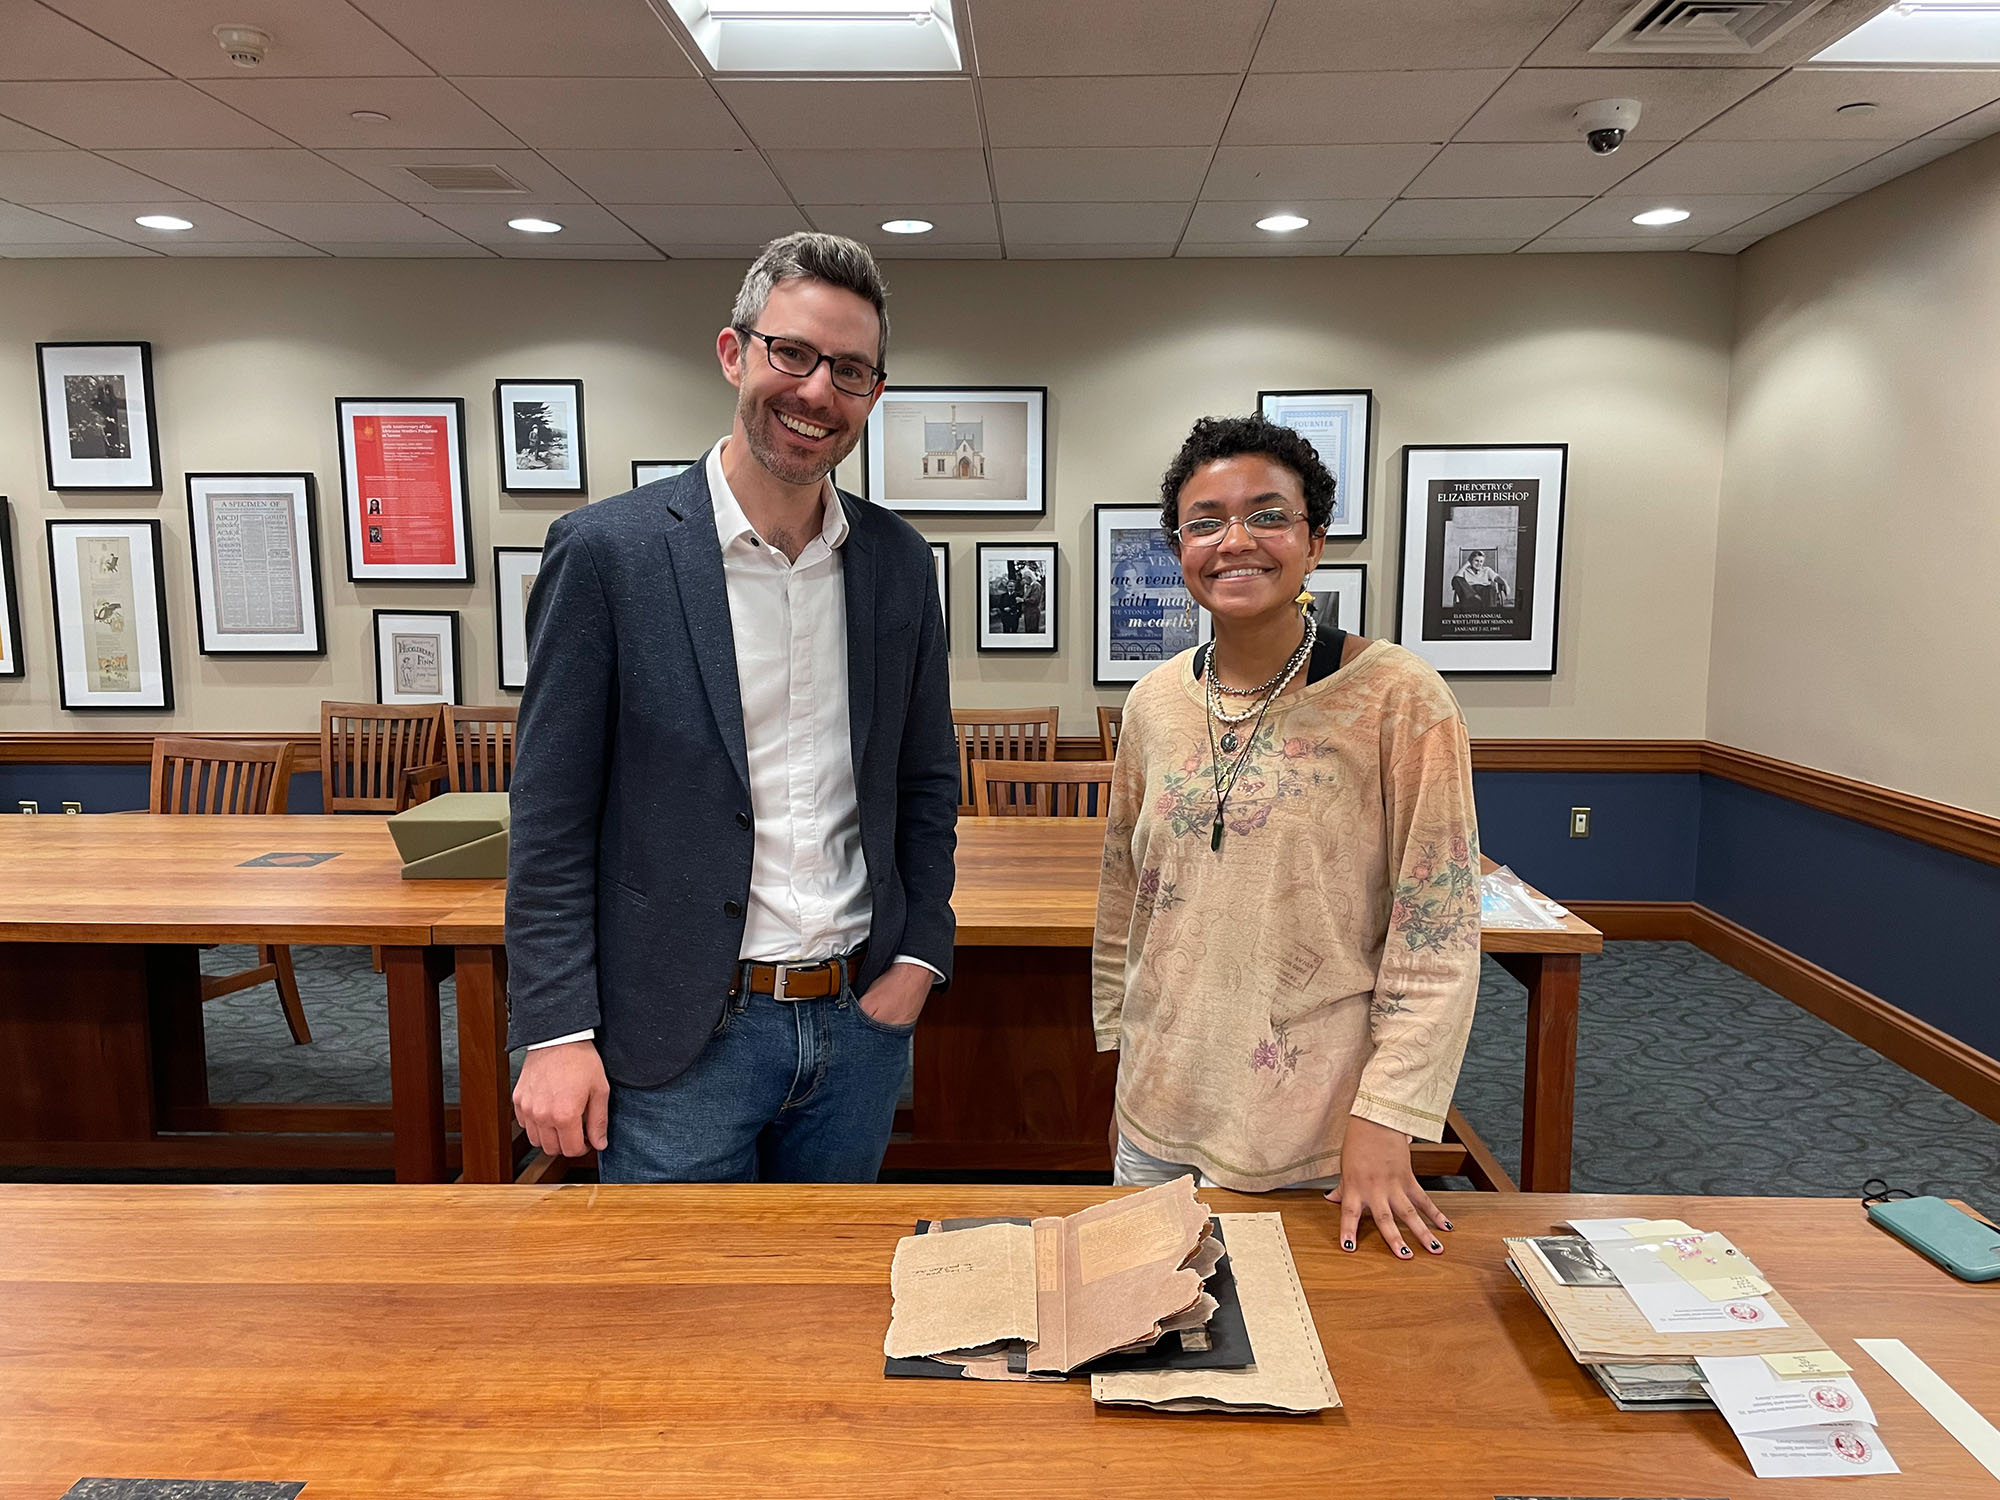 John Murphy, the Loeb’s curator of prints and drawings, and Ford Scholar Carissa Kolcun pose with 11033, an artist’s book that chronicles the story of Mary Morst, who gave birth to twins while she was incarcerated in a Virginia prison in 1913.